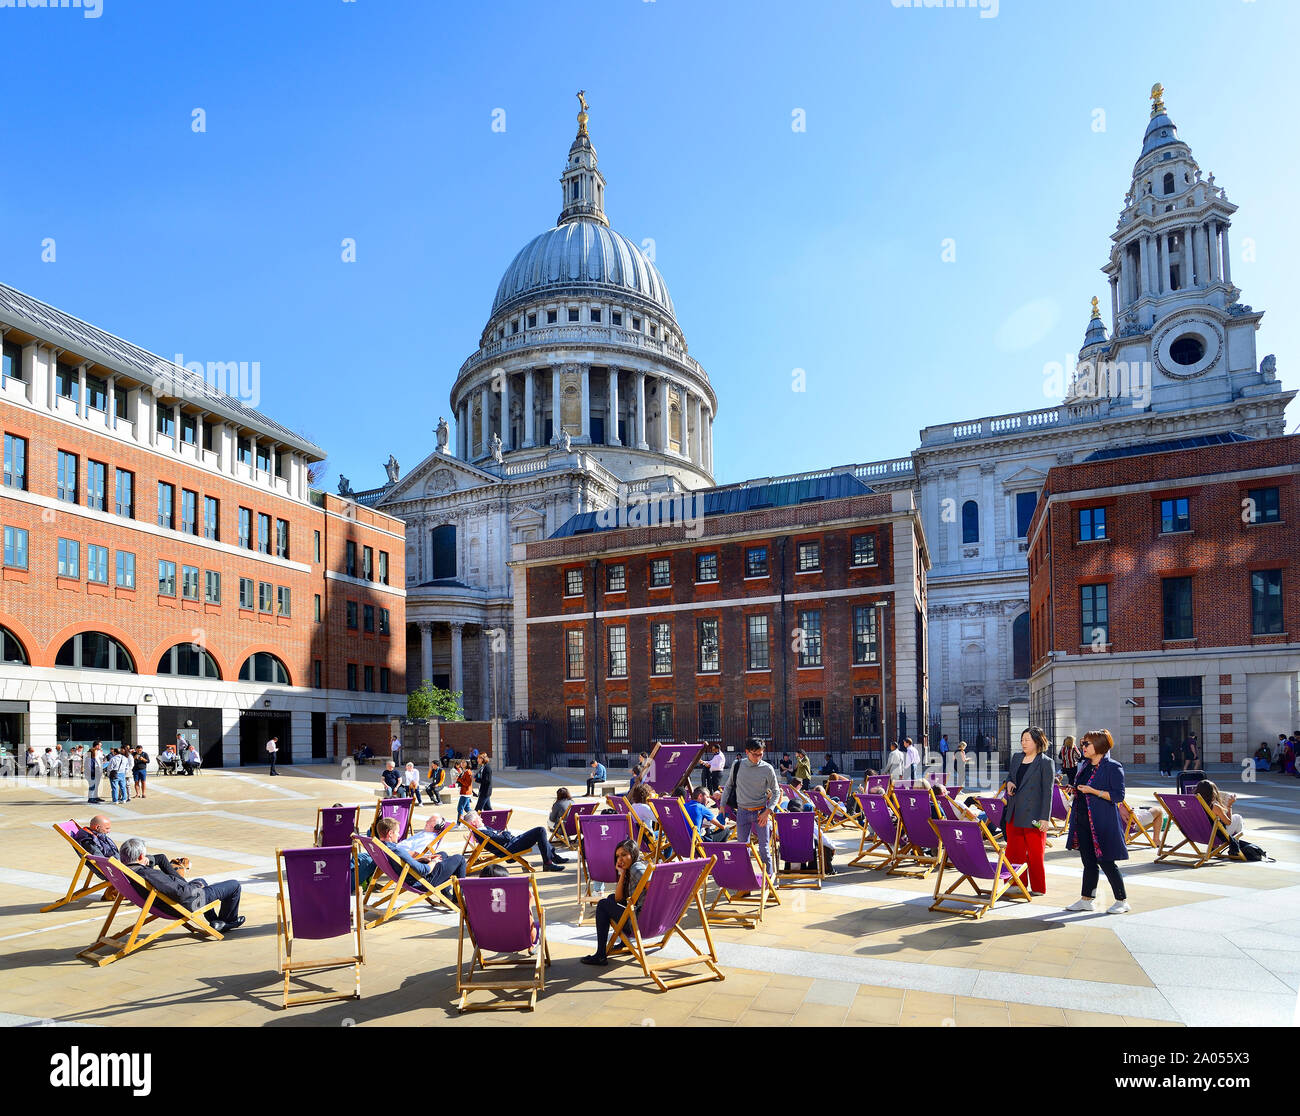 London, England UK. Paternoster Square, behind St Paul's Cathedral. People sitting in deck chairs during their lunch hour Stock Photo